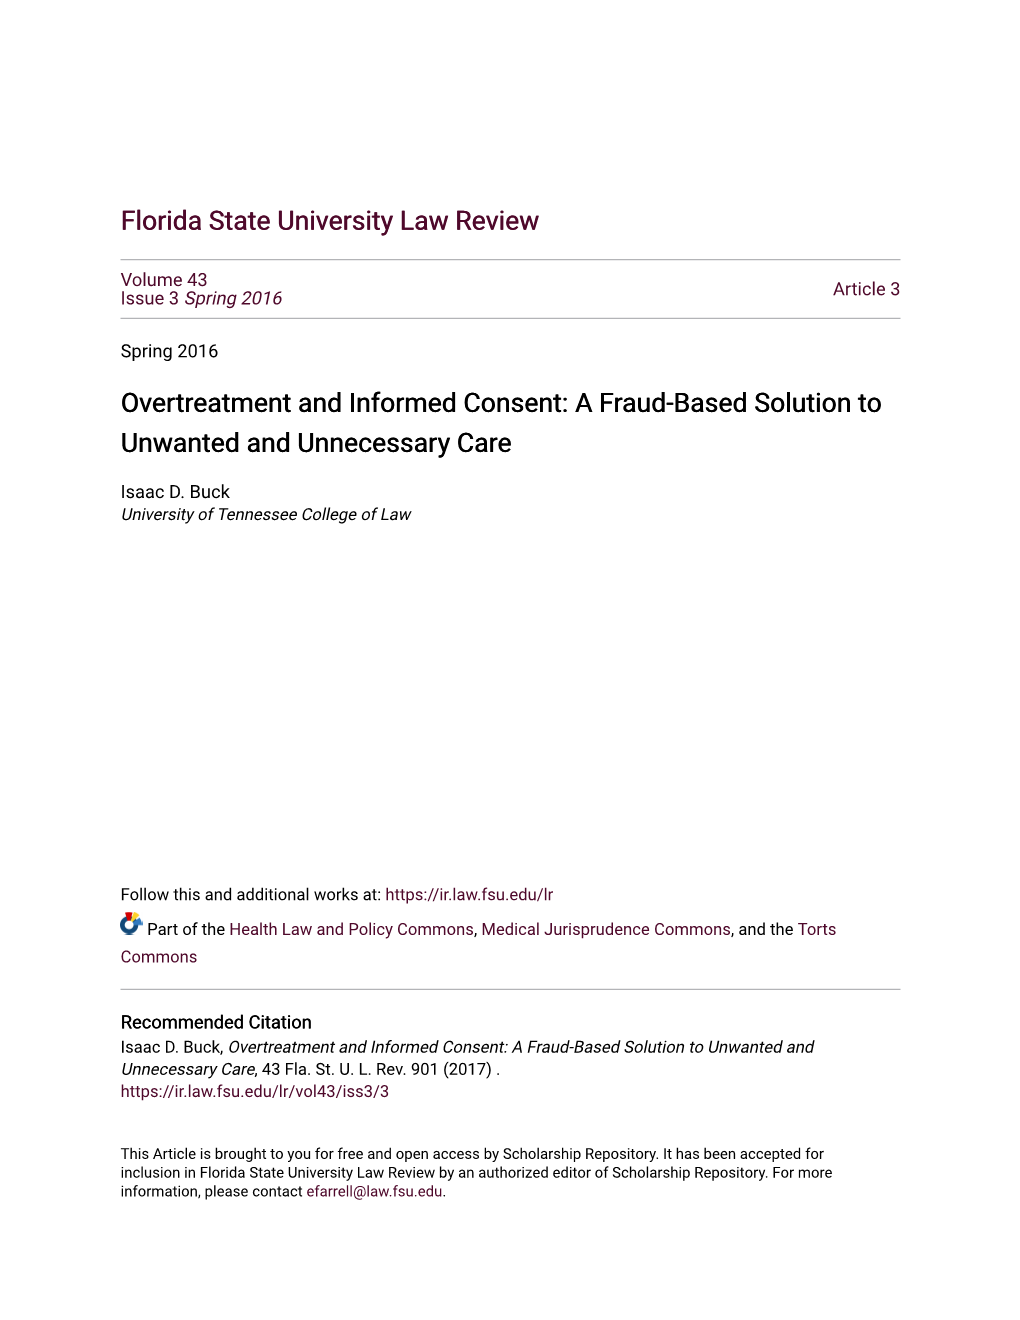 Overtreatment and Informed Consent: a Fraud-Based Solution to Unwanted and Unnecessary Care